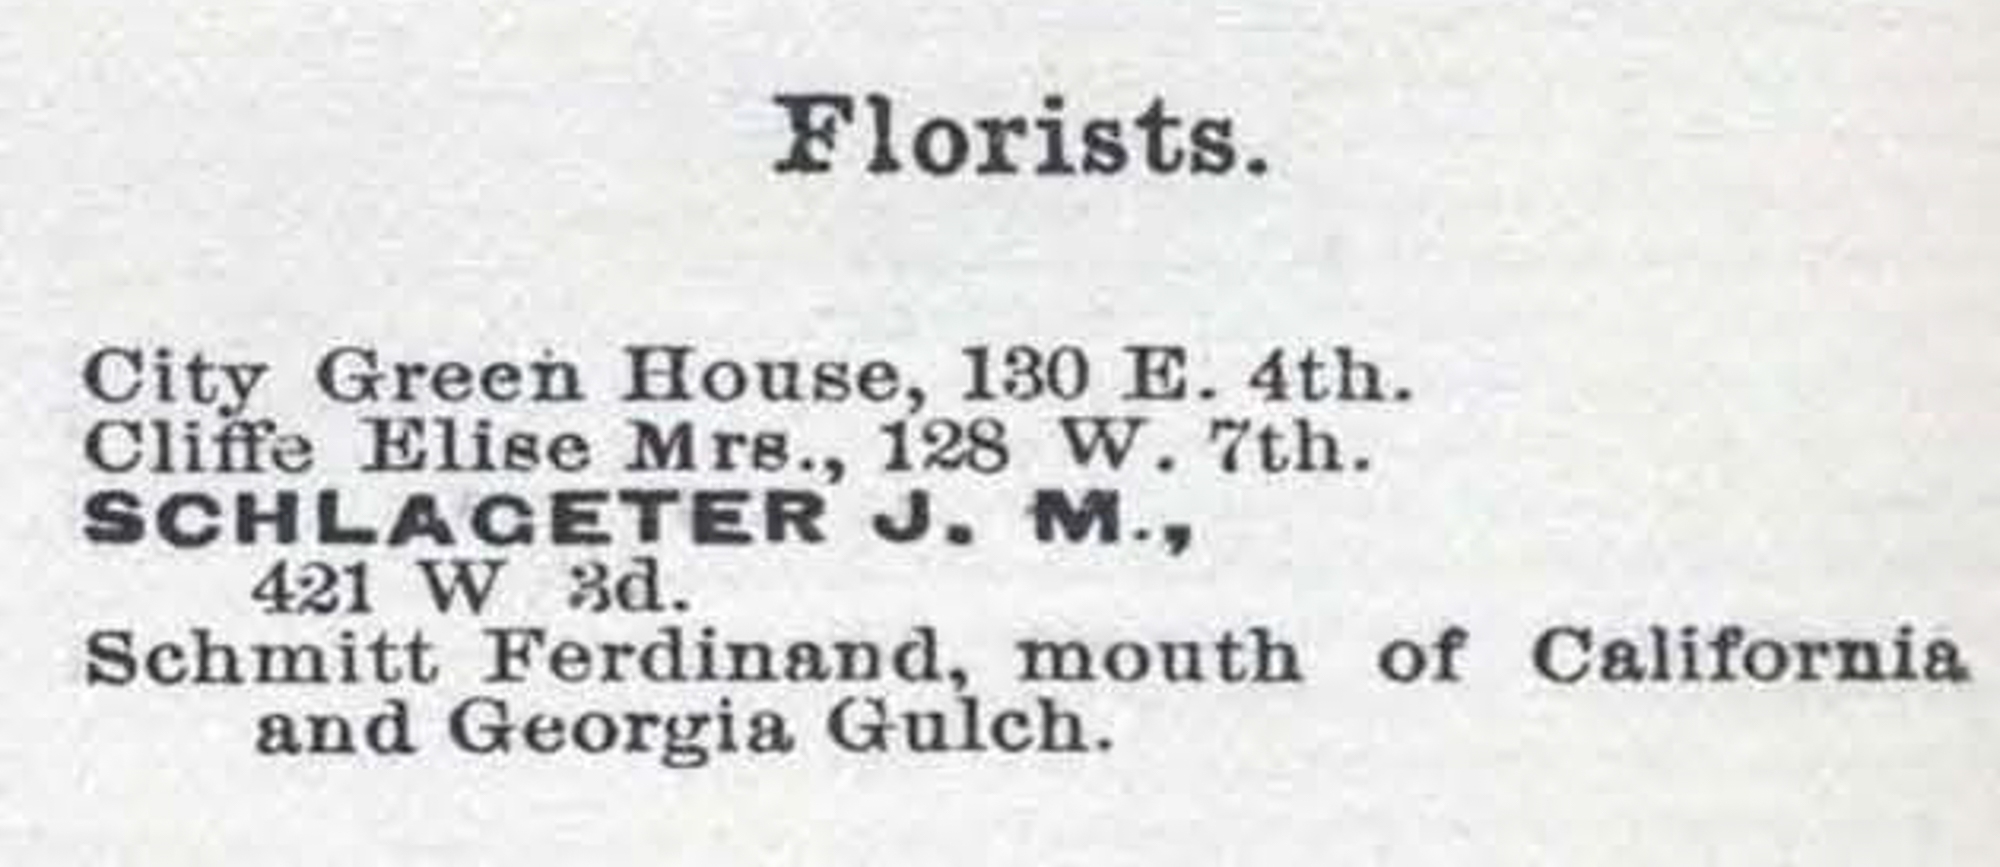 Dauth Family Archive - 1886 - Leadville Directory - Entry for Elisabeth Cliffe Florist